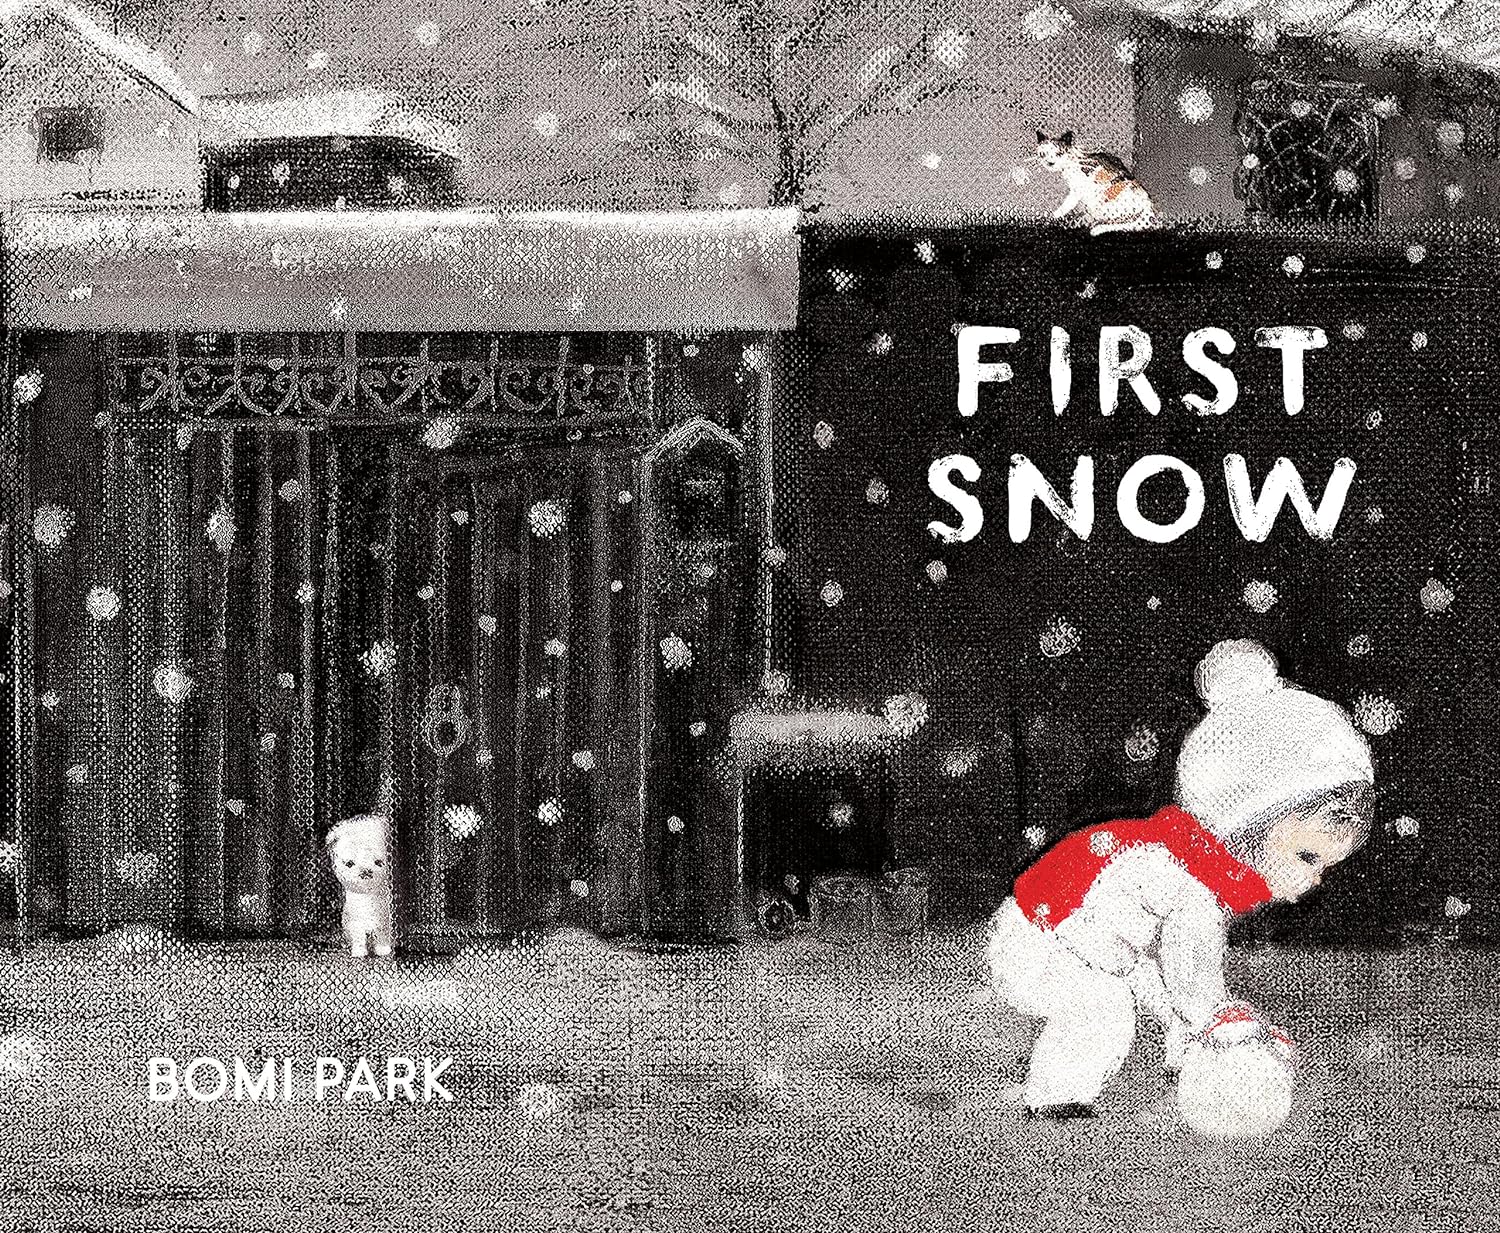 First Snow by Bomi Park